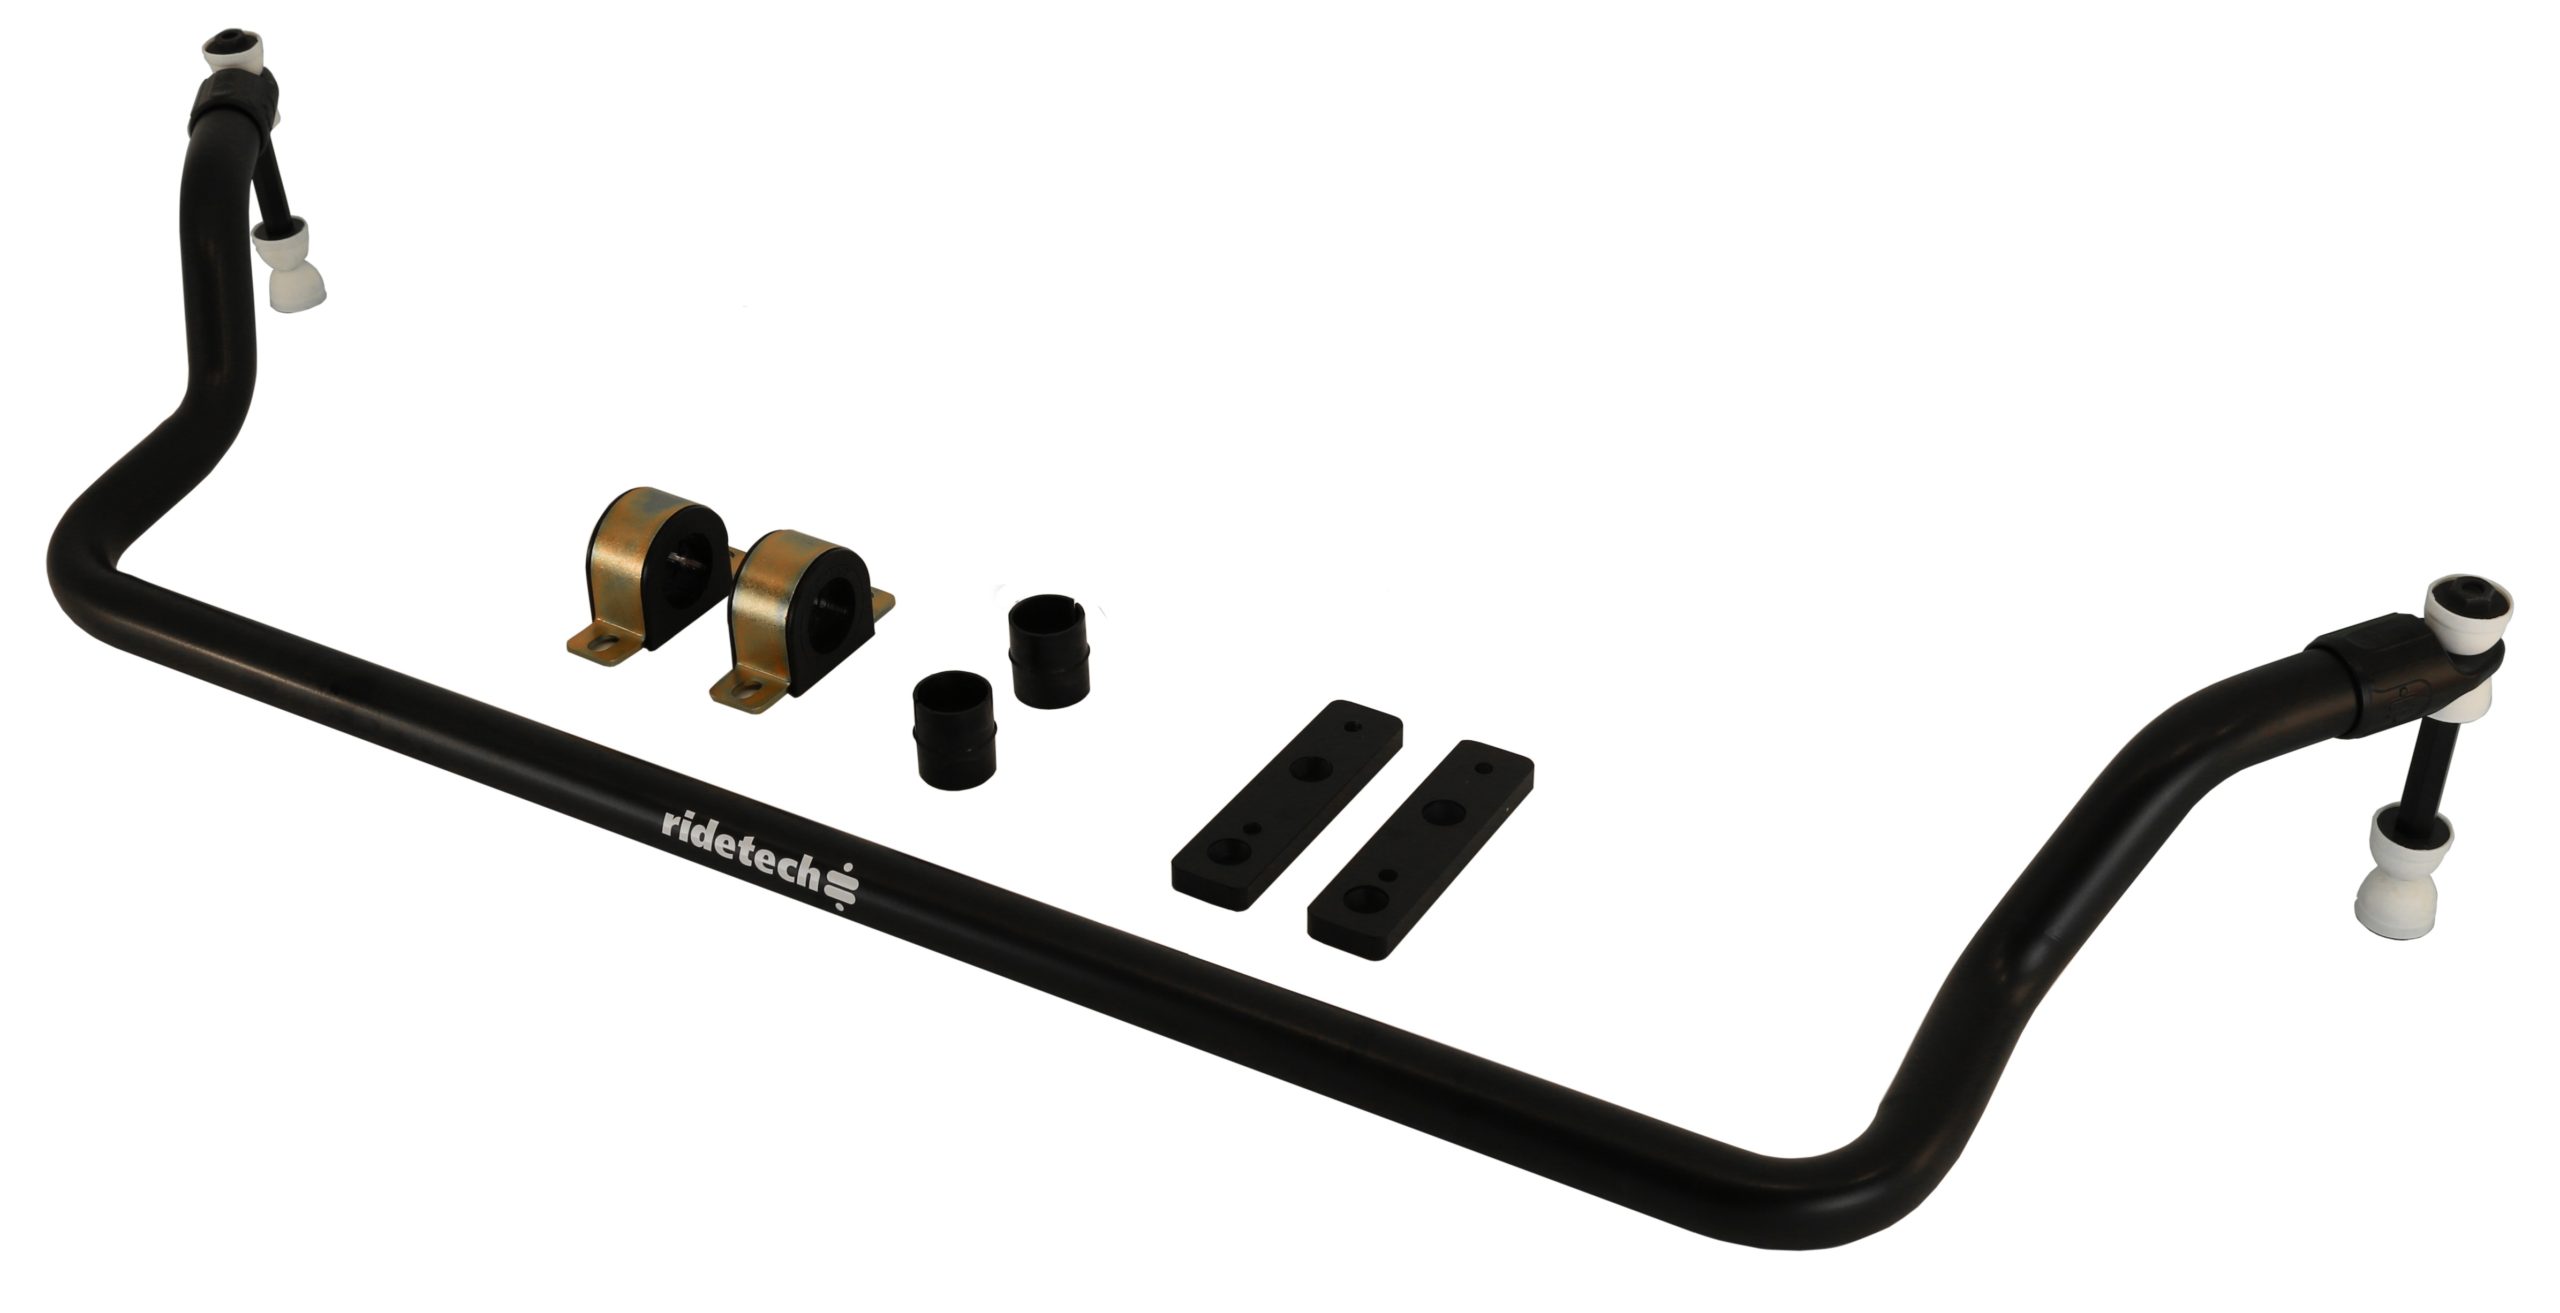 1964-1972 Chevy Chevelle GM A-Body Cutlass GTO Performance Front Sway Bar Kit 